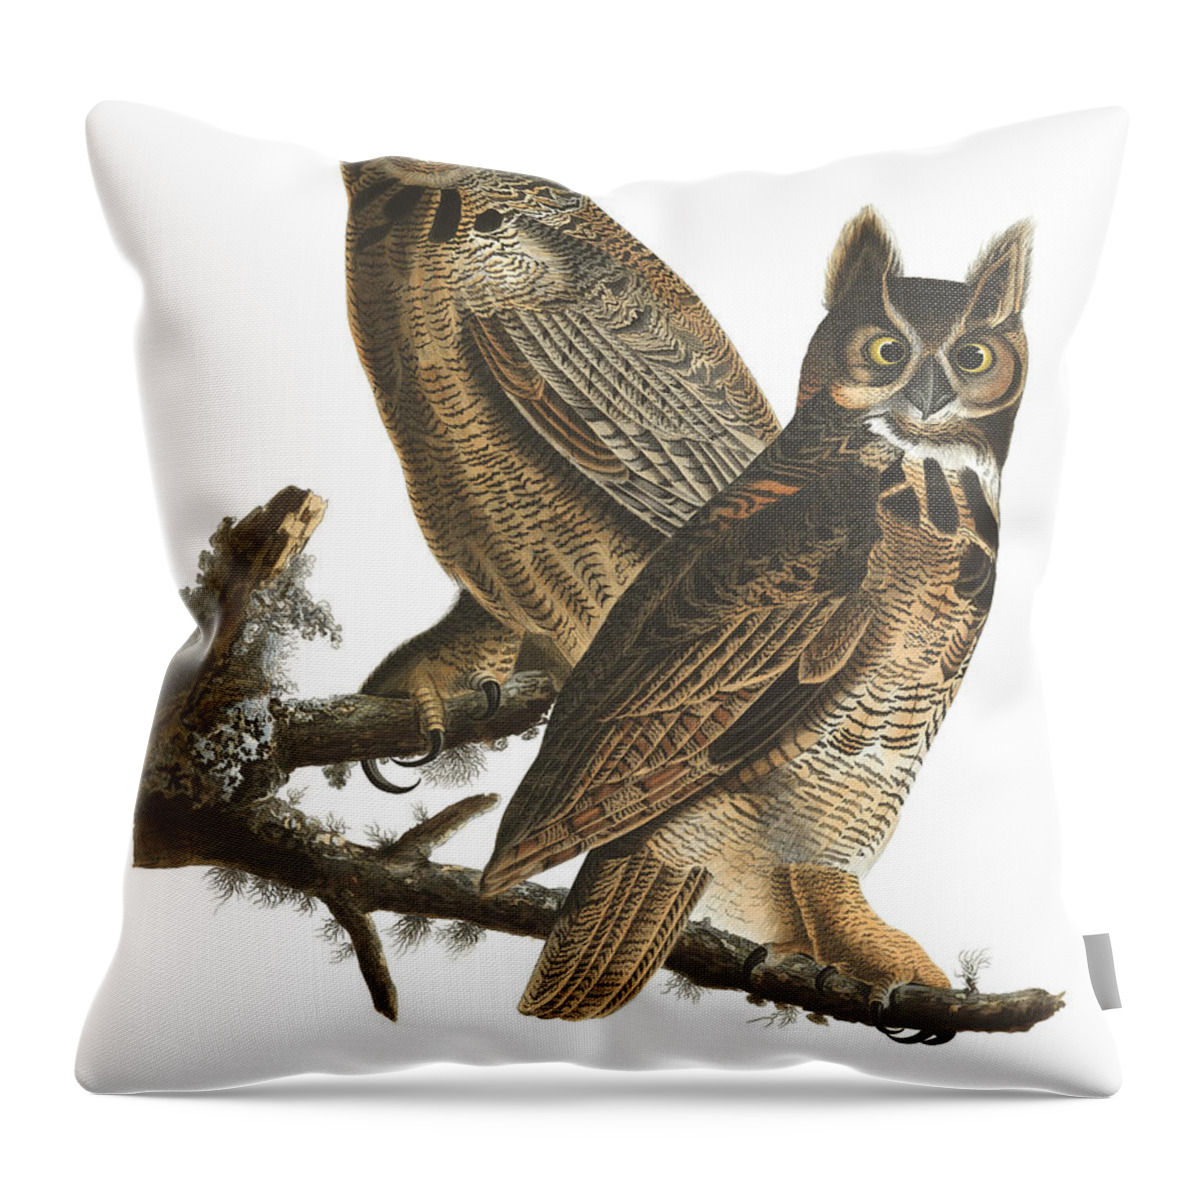 Great Horned Owl Throw Pillow featuring the drawing Great Horned Owl by John James Audubon by Mango Art